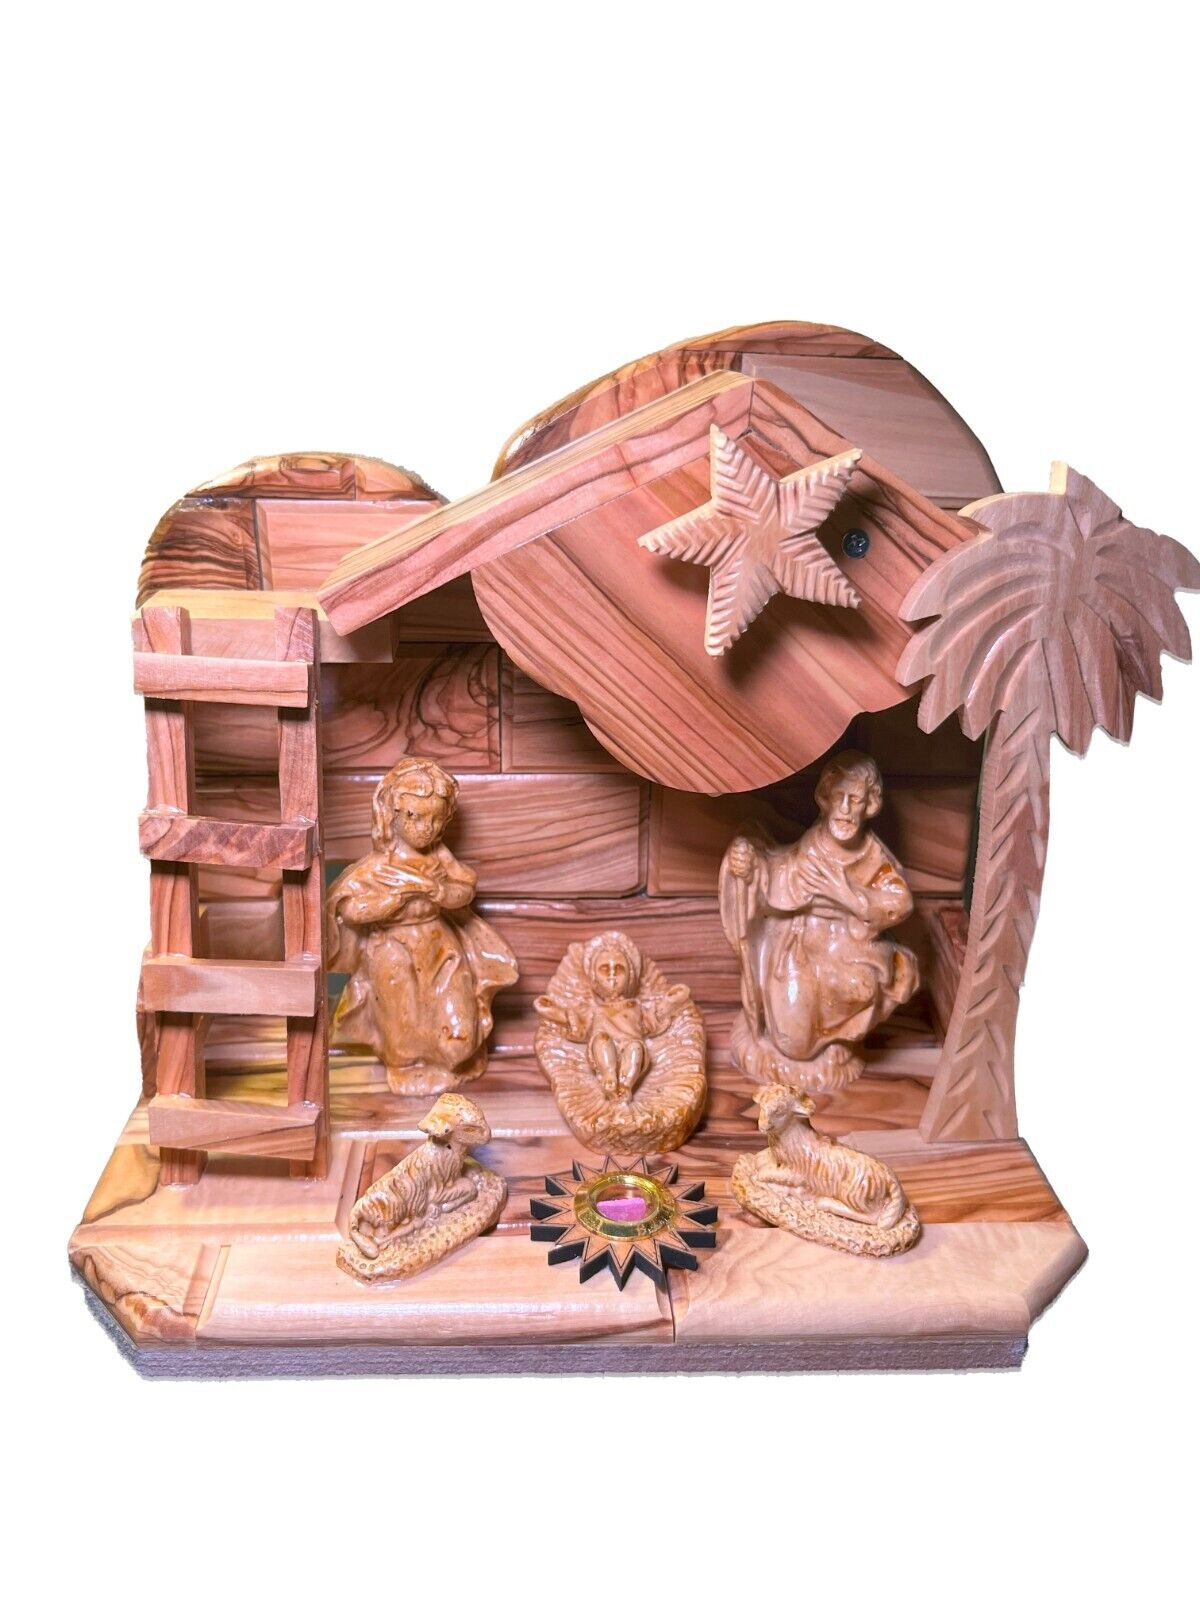 Nativity scene with the cave in Bethlehem olive wood Jesus birth 7x9 inches